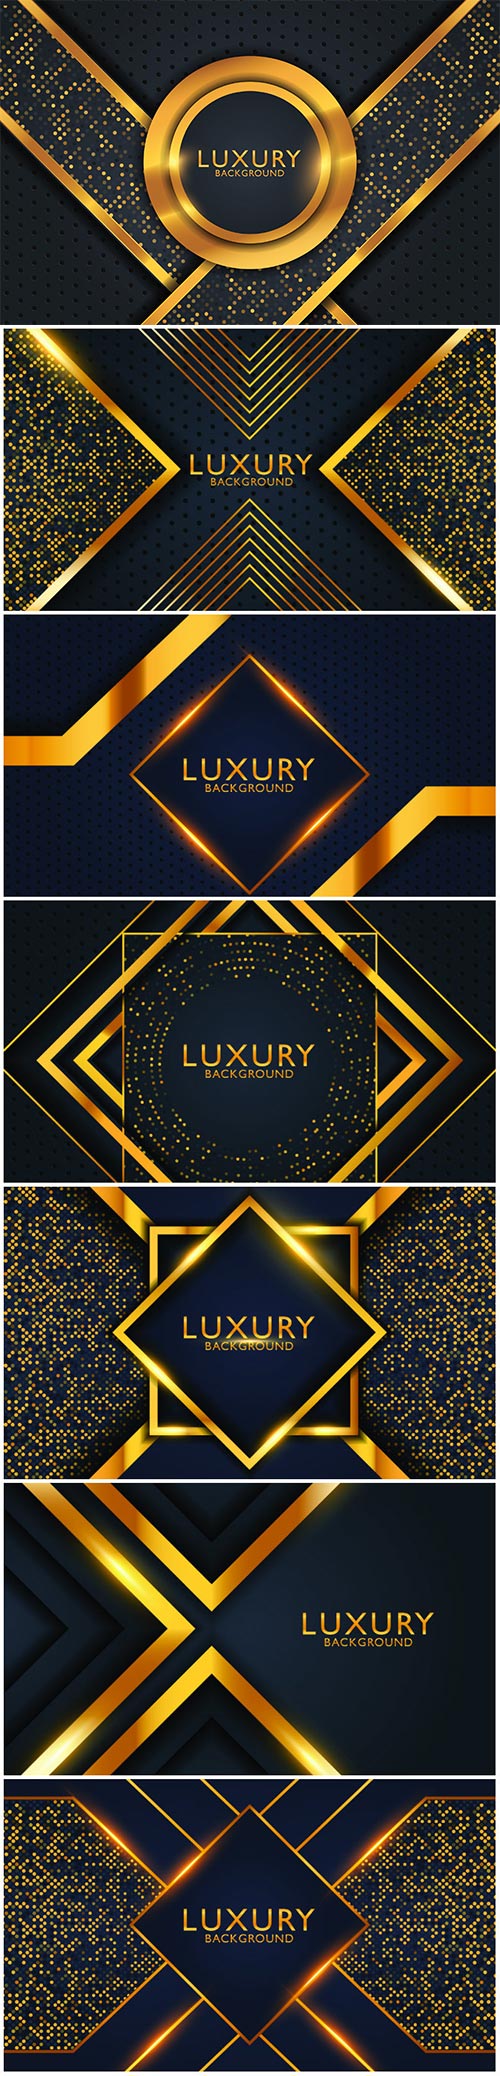 Geometric luxury gold metal background. Graphic design element for invitation, cover